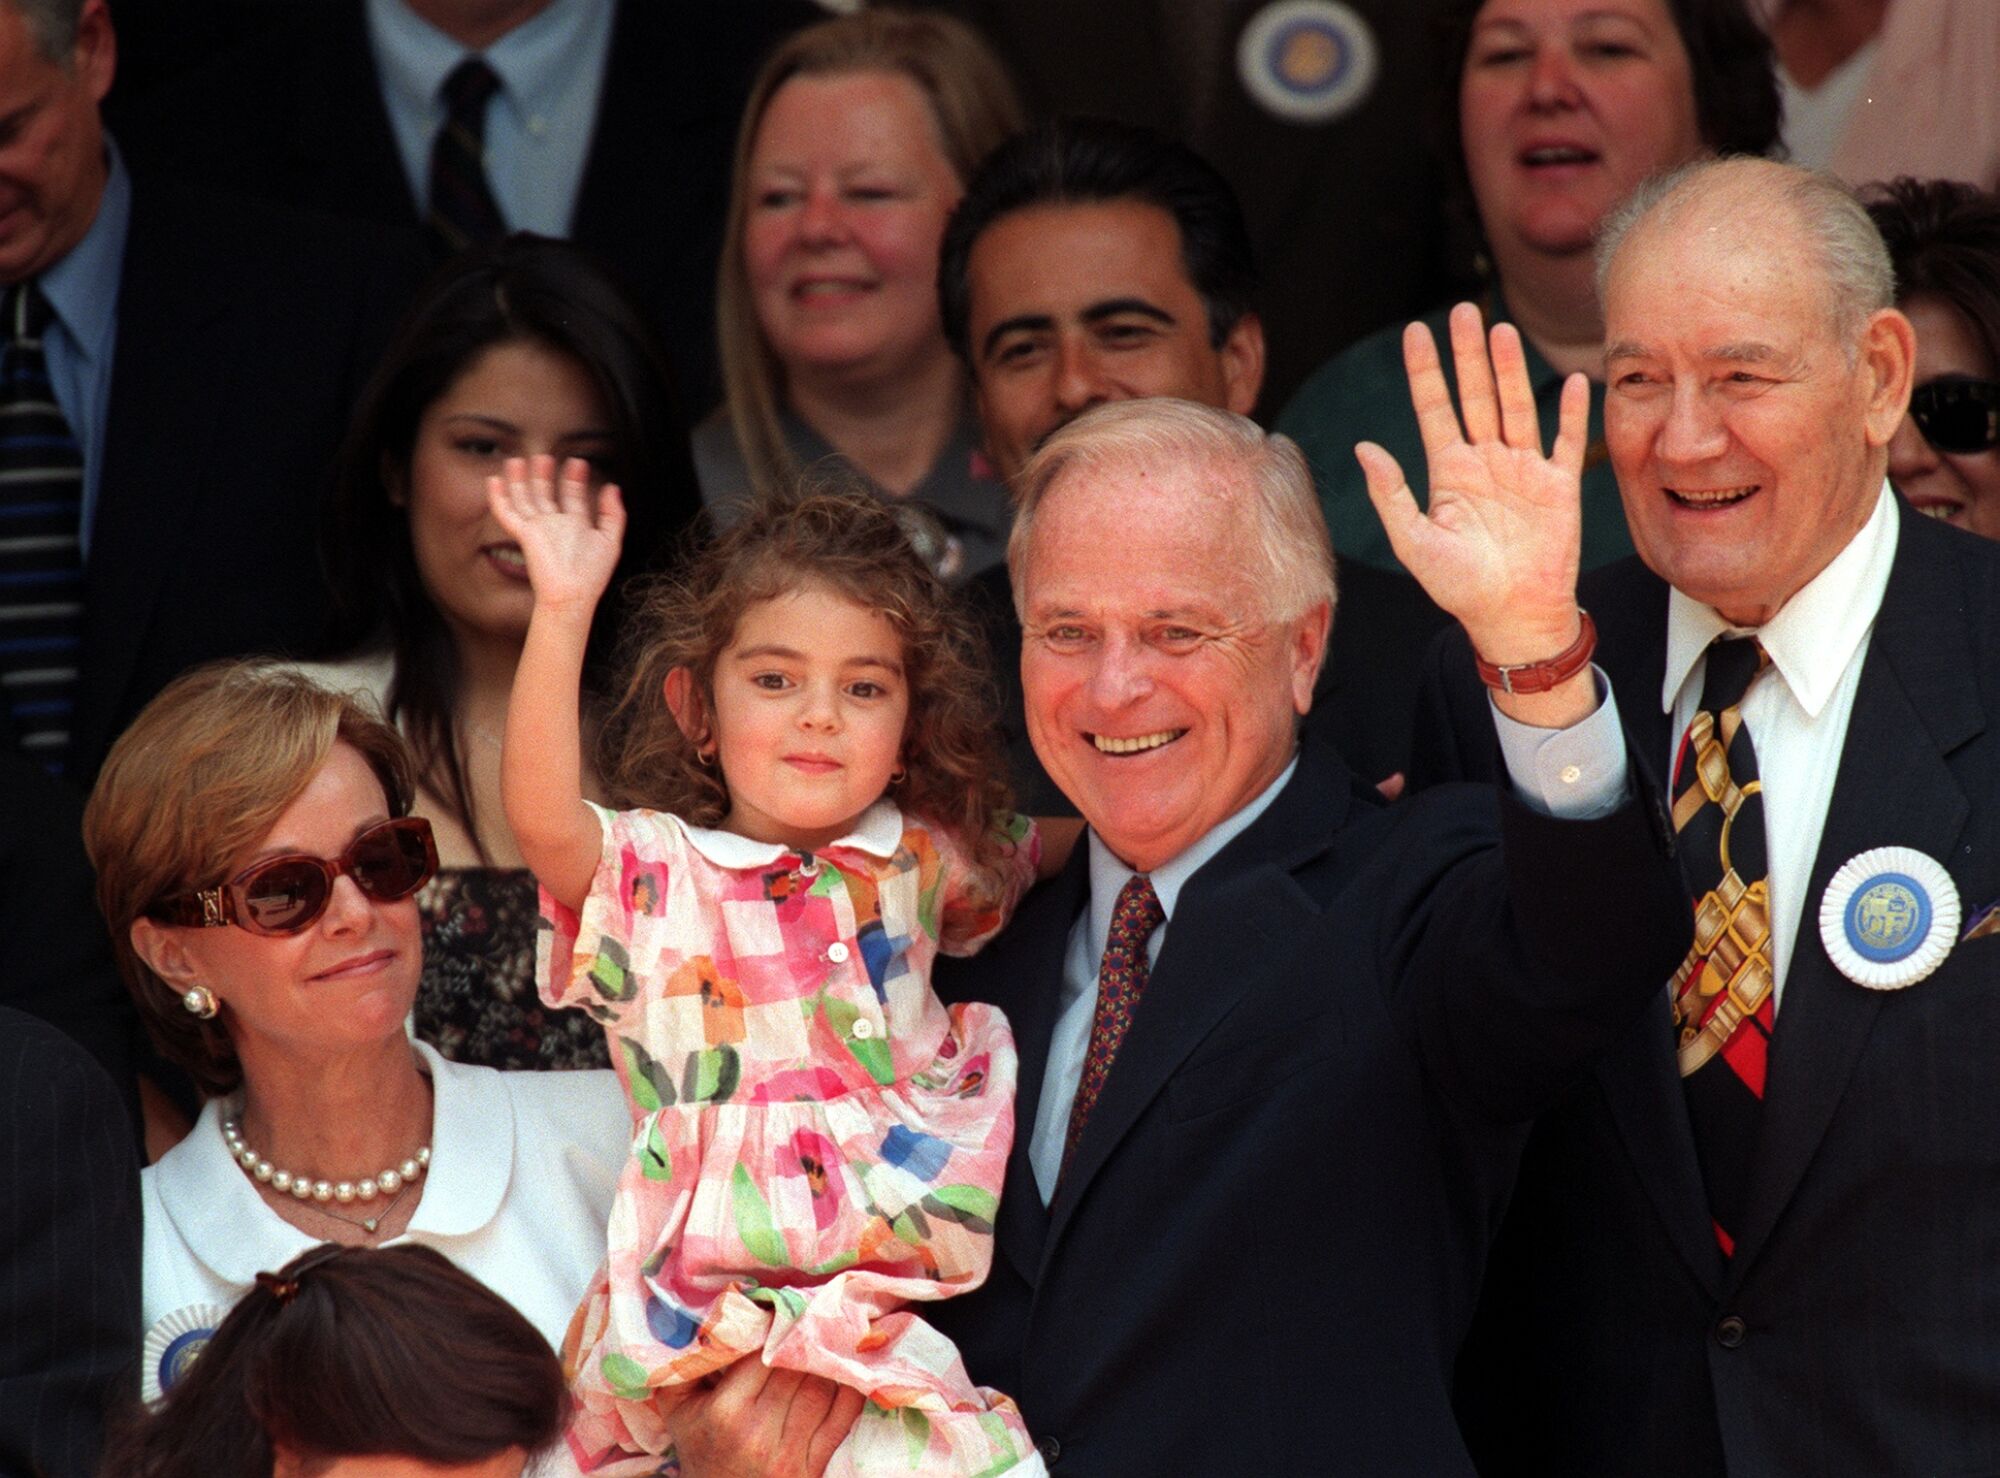 Los Angeles Mayor Richard J. Riordan waves to well-wishers with his granddaughter, Nicole Farrel, 3, in her arms